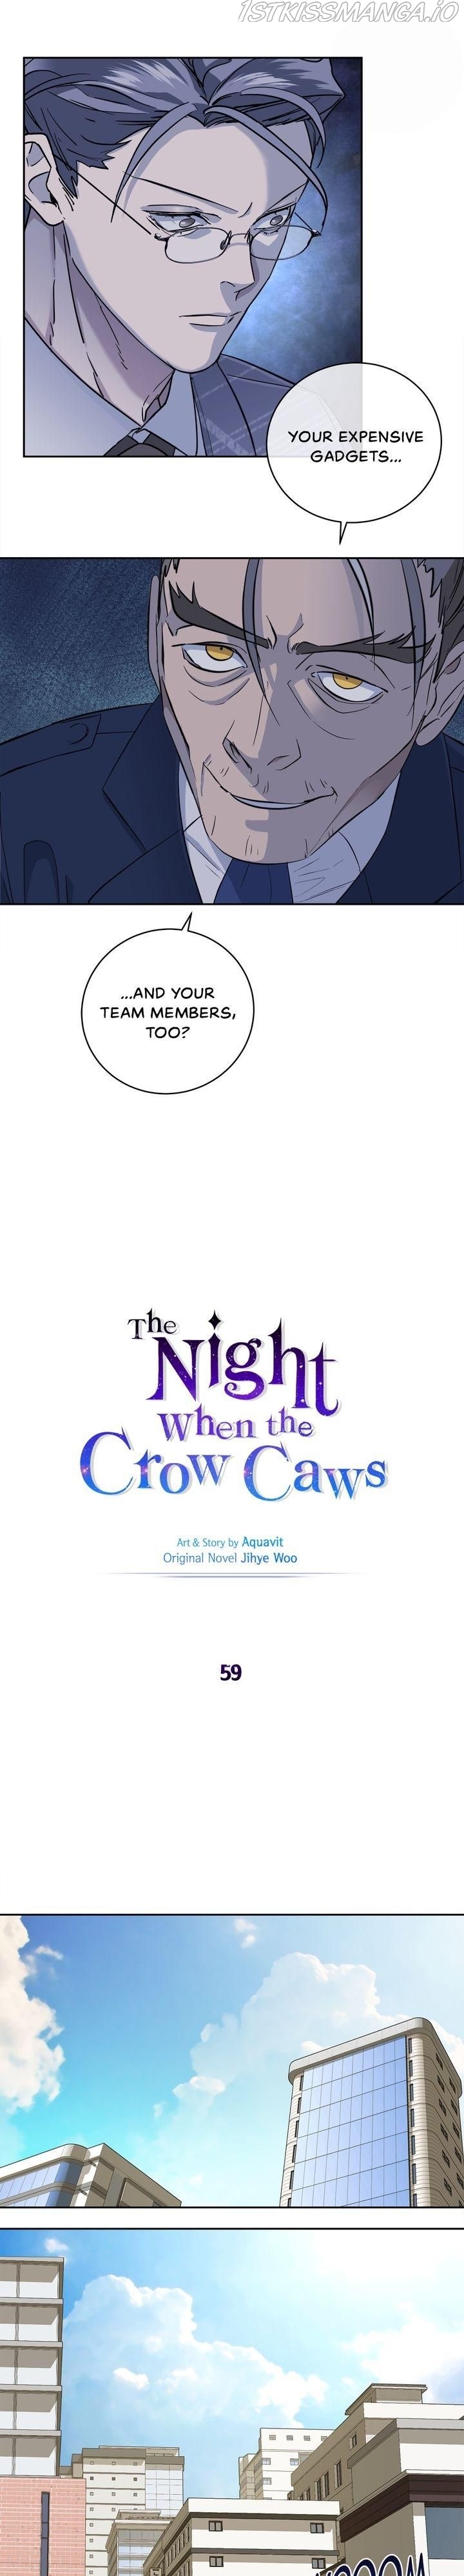 The Night When The Crow Caws - Page 3